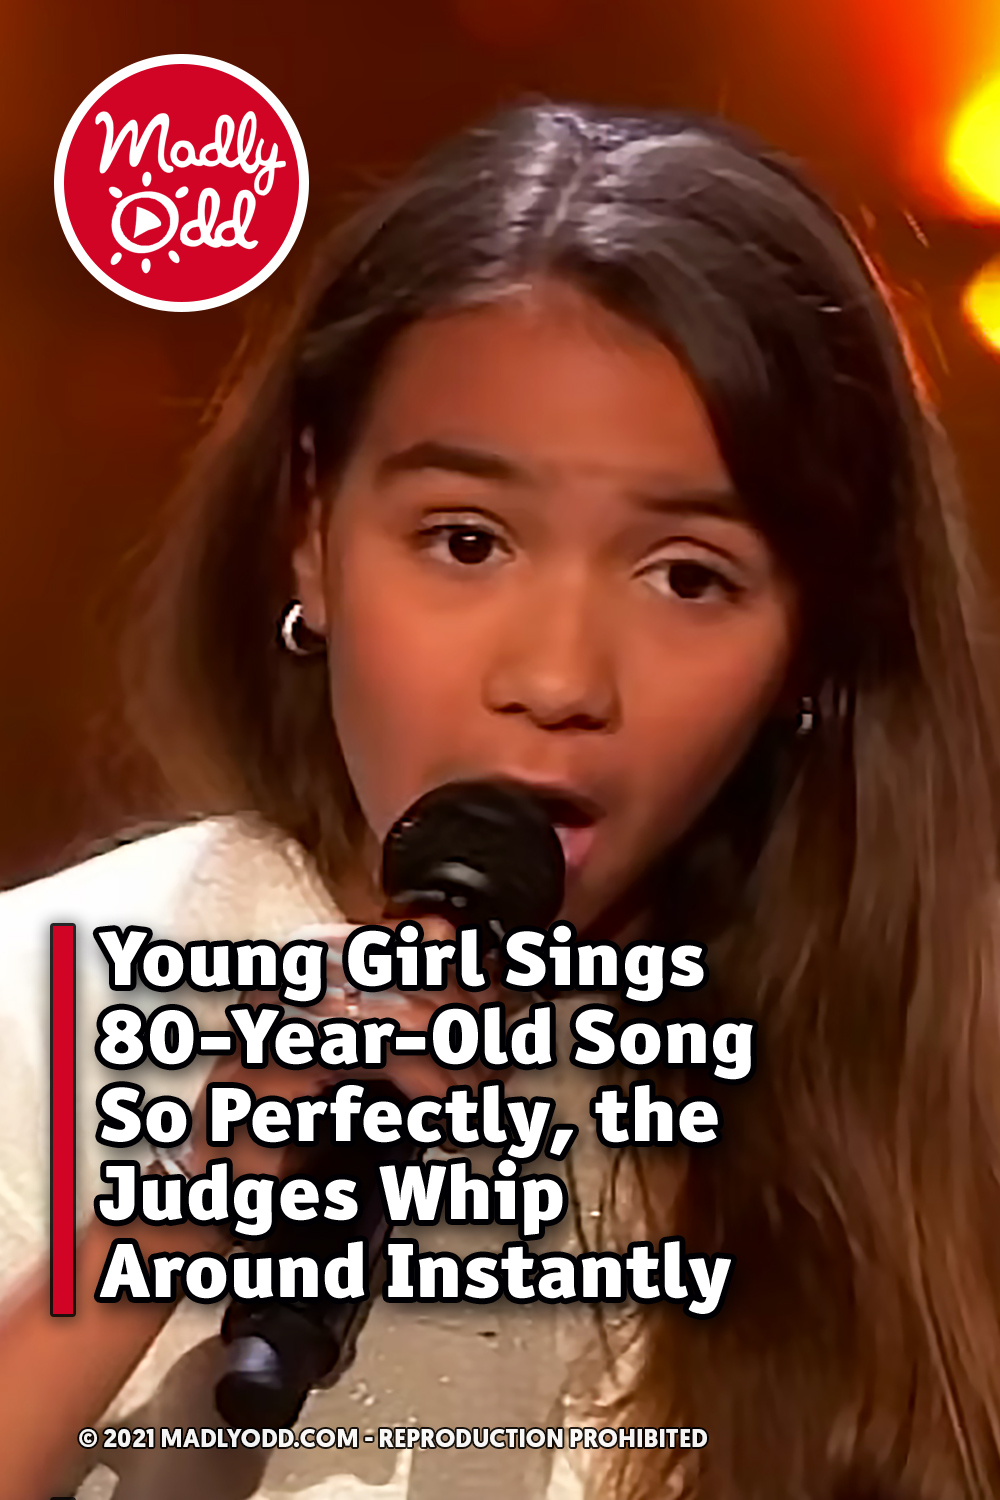 Young Girl Sings 80-Year-Old Song So Perfectly, the Judges Whip Around Instantly